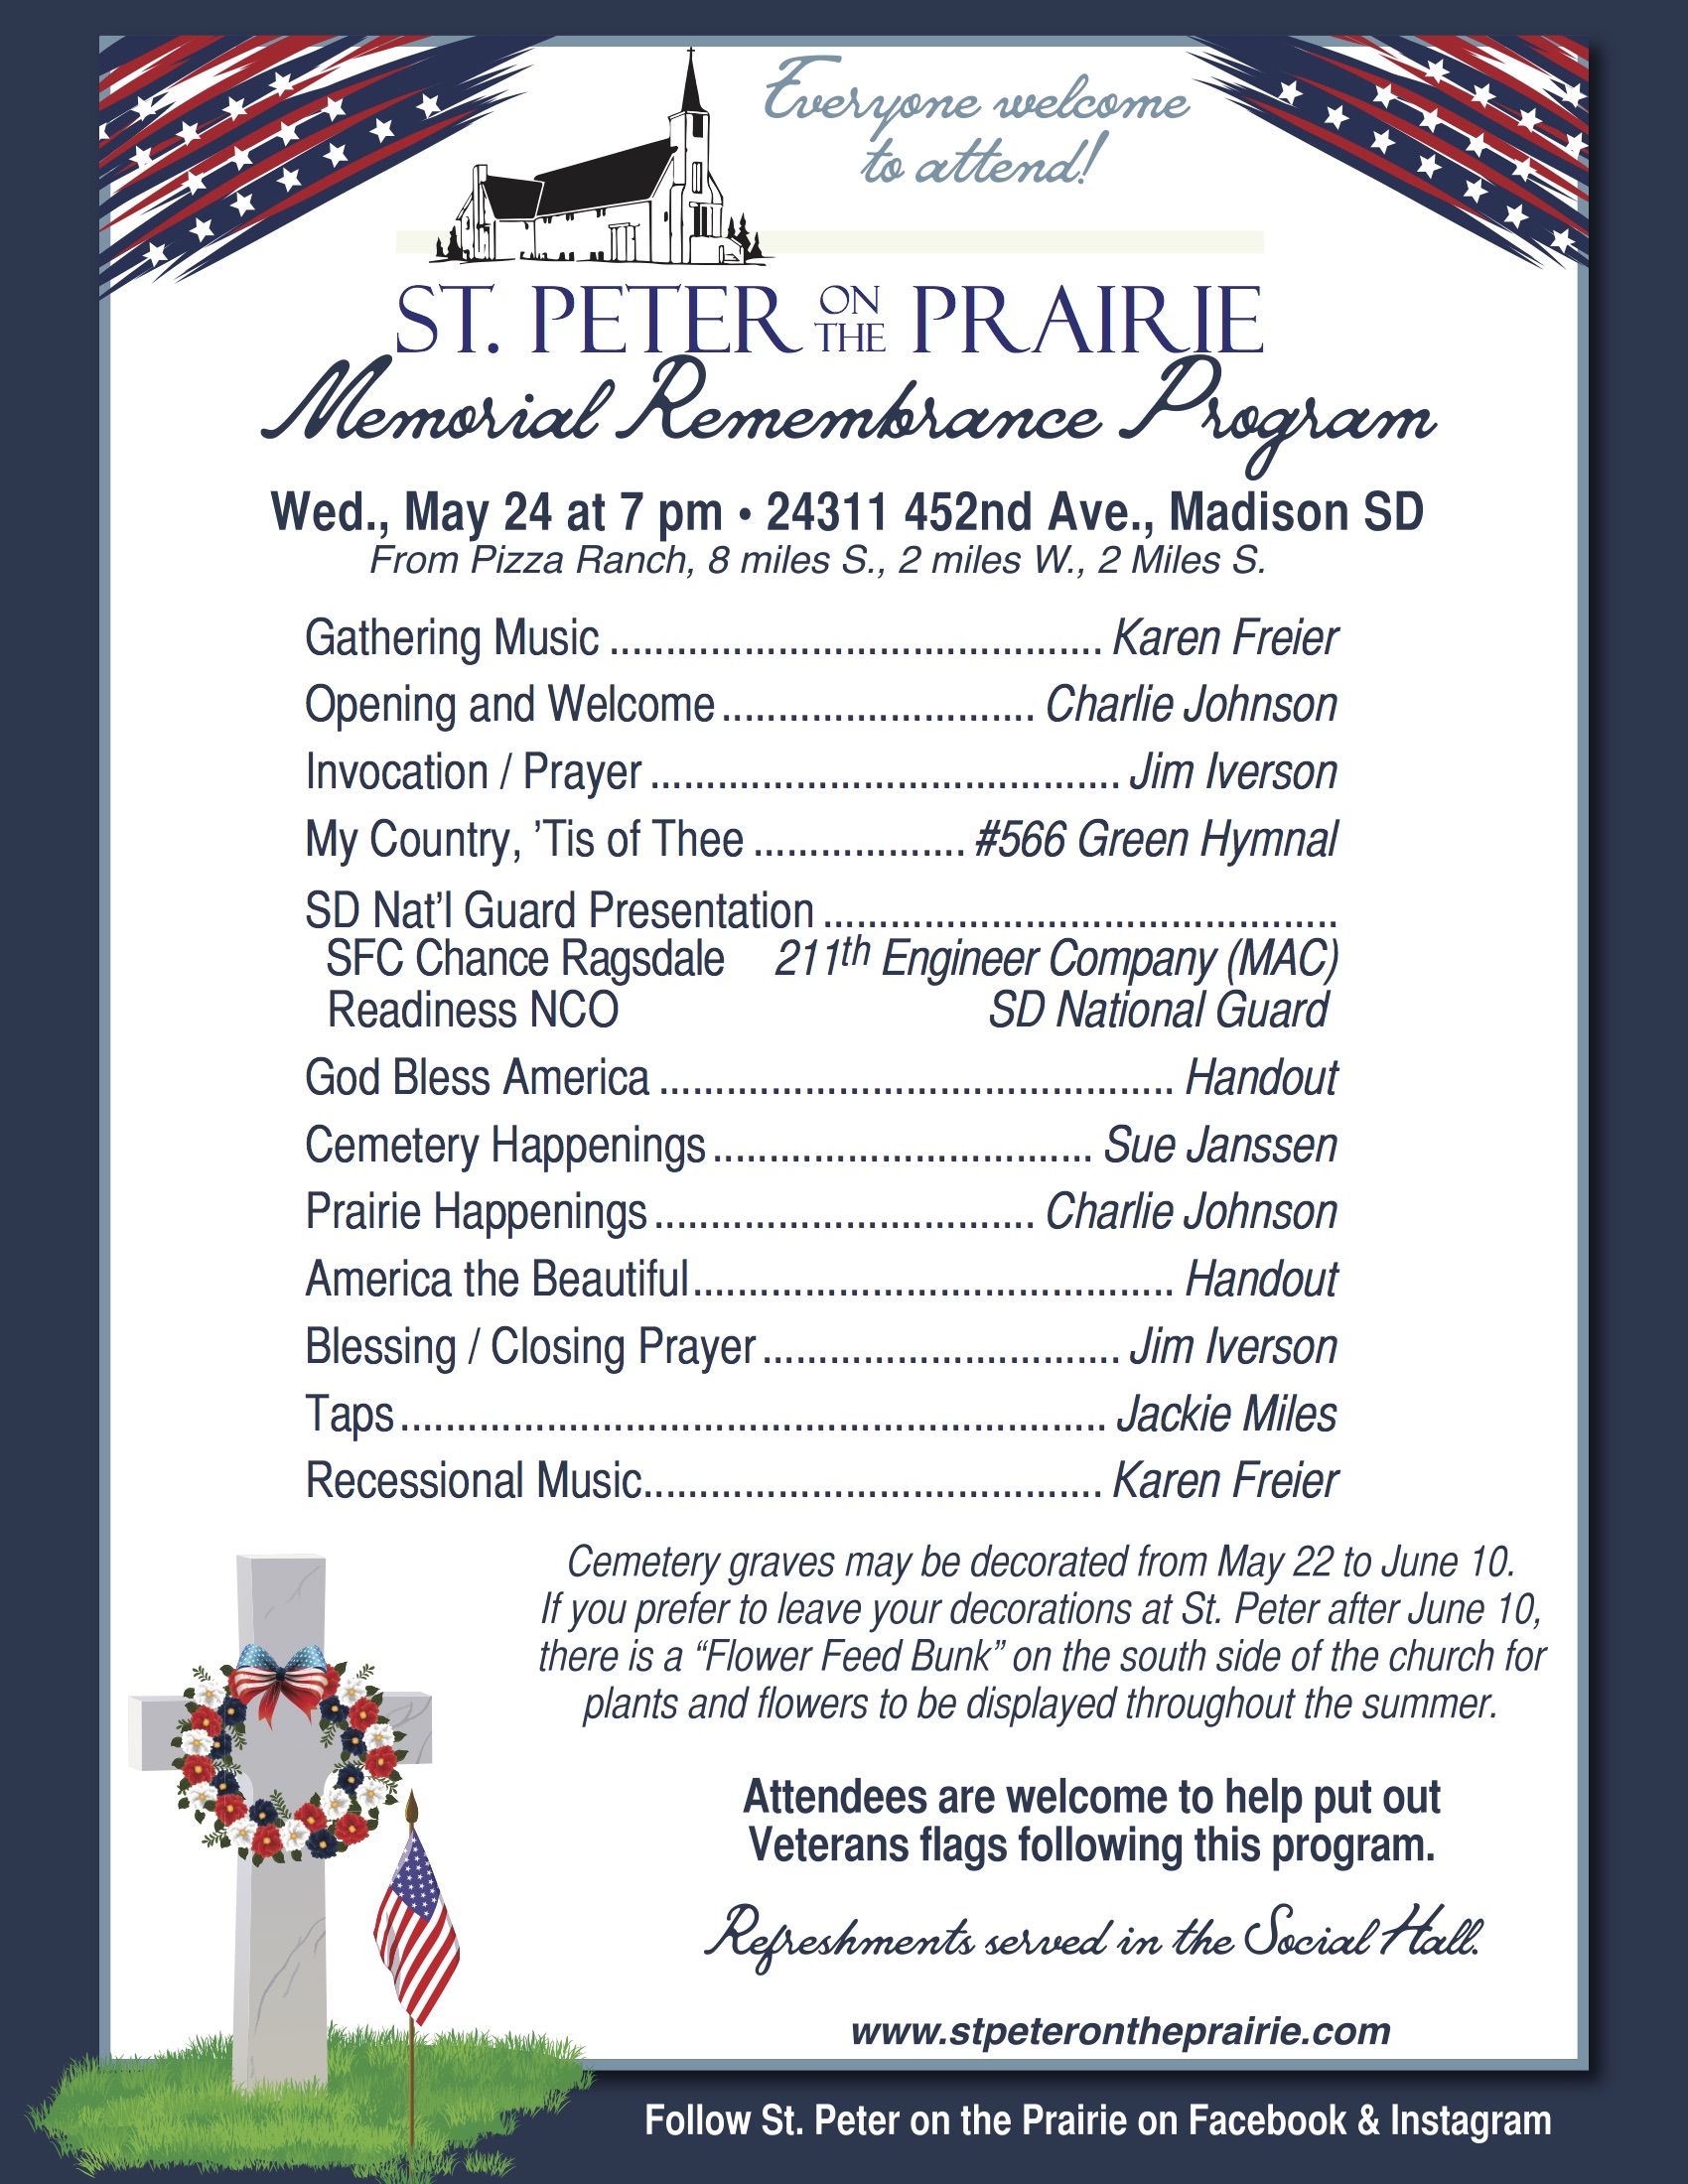 <h1 class="tribe-events-single-event-title">St. Peter on the Prairie Memorial Remembrance Program</h1>